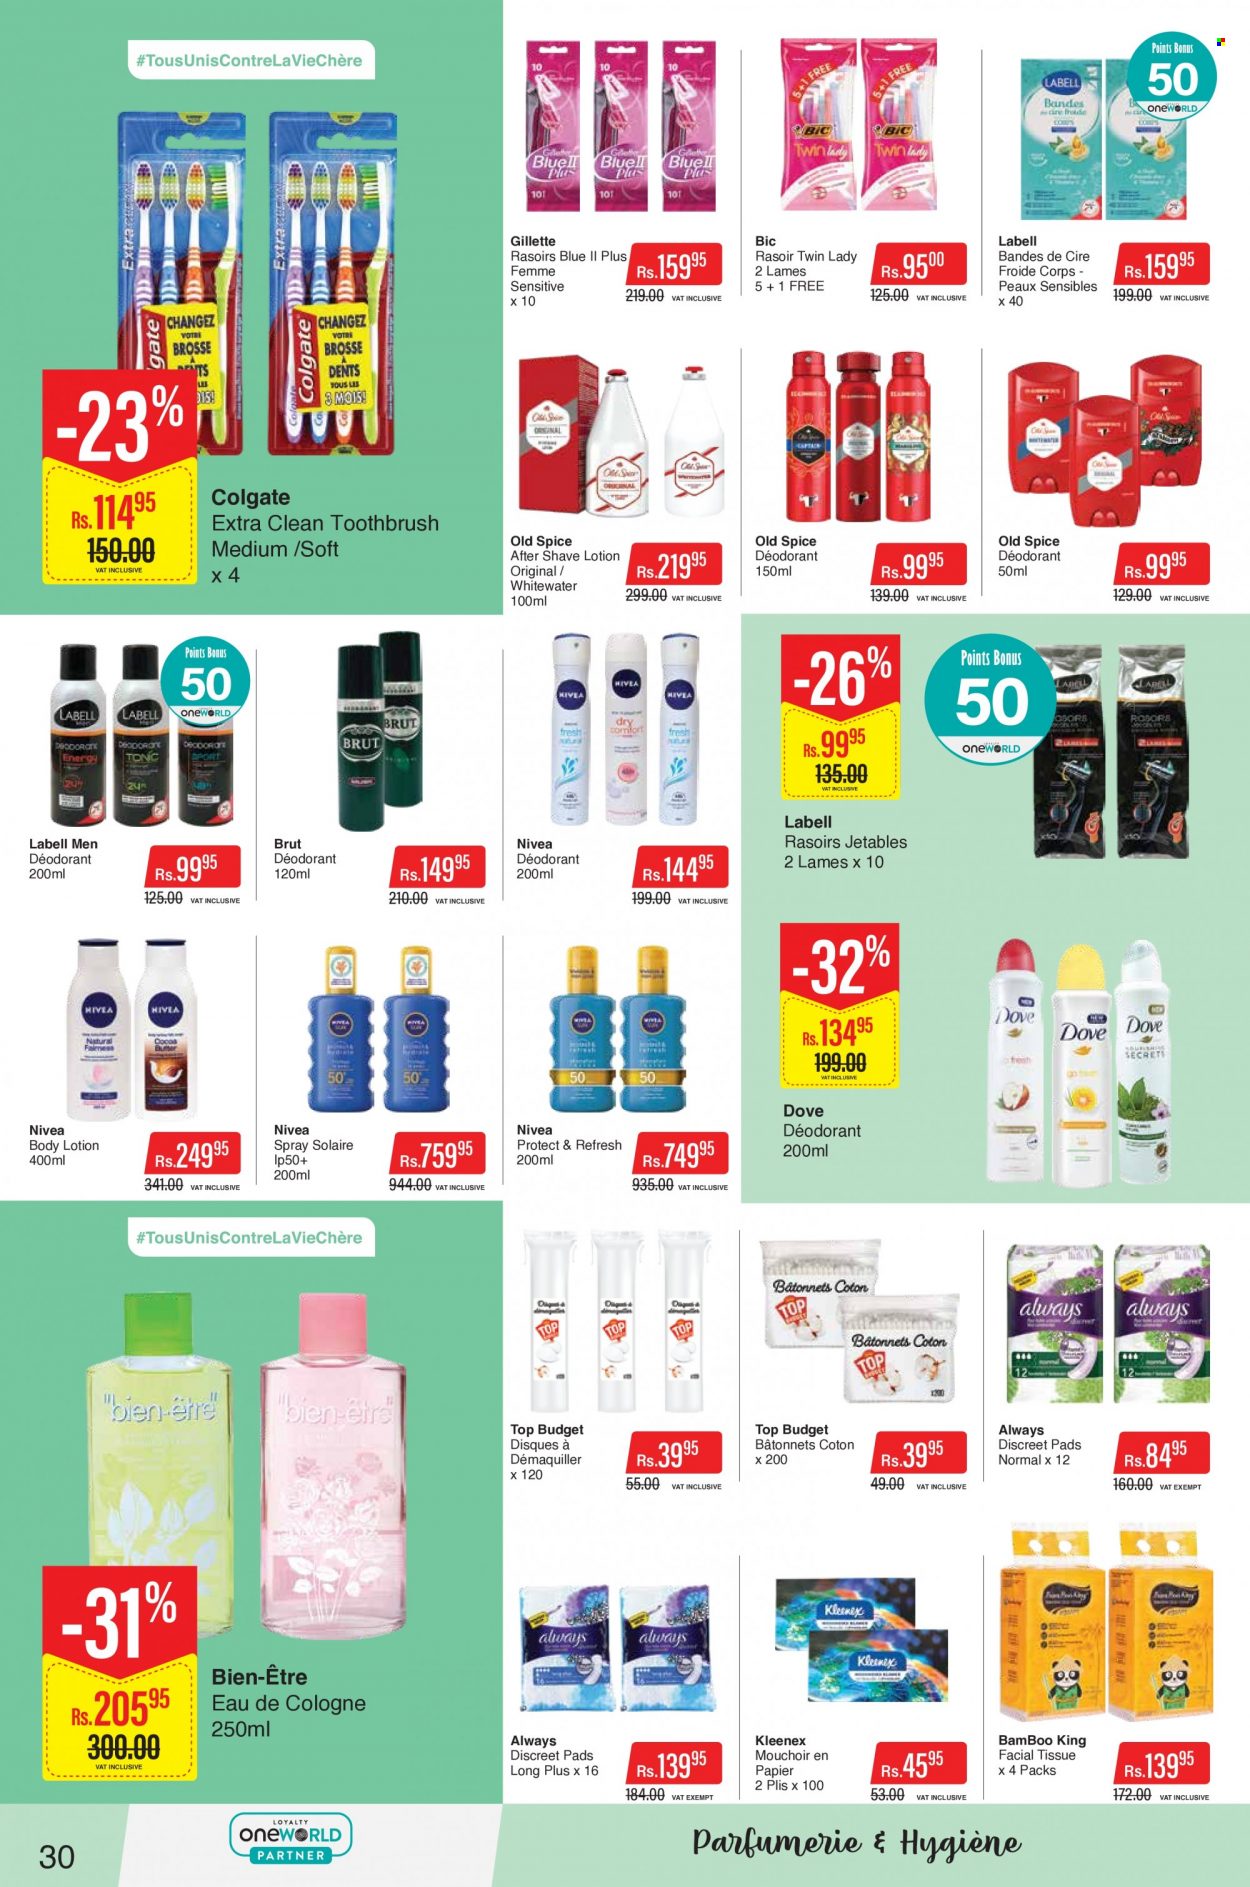 thumbnail - Intermart Catalogue - 23.11.2022 - 20.12.2022 - Sales products - Dove, spice, Nivea, Kleenex, tissues, toothbrush, sanitary pads, Always Discreet, Gillette, body lotion, after shave, anti-perspirant, cologne, Brut, BIC, Colgate, Old Spice, deodorant. Page 30.